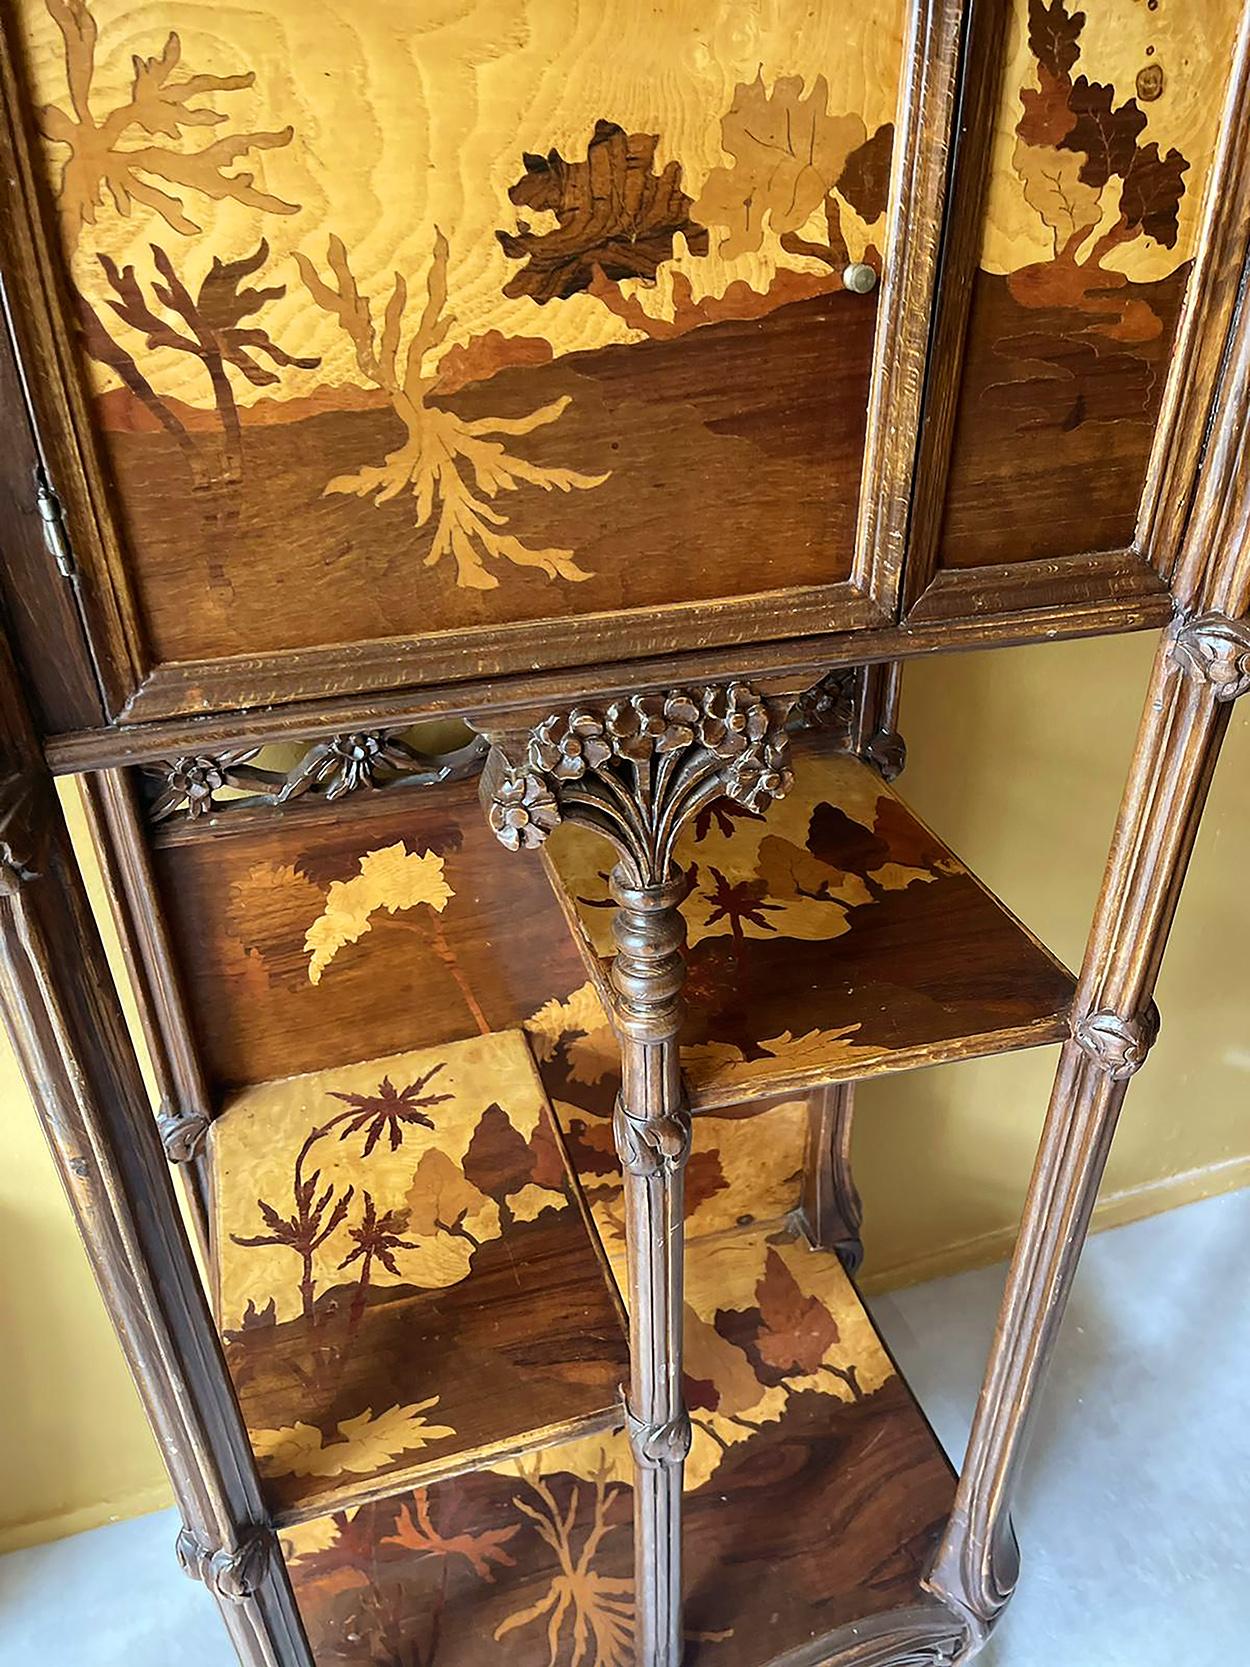 An exceptional and complex mixed wood cabinet with carved walnut and exotic wood inlays. Everything is there: the love of plants and nature with sculpted elements and the inlaid decor. Only the back side and inside the doors you see solid wood. The